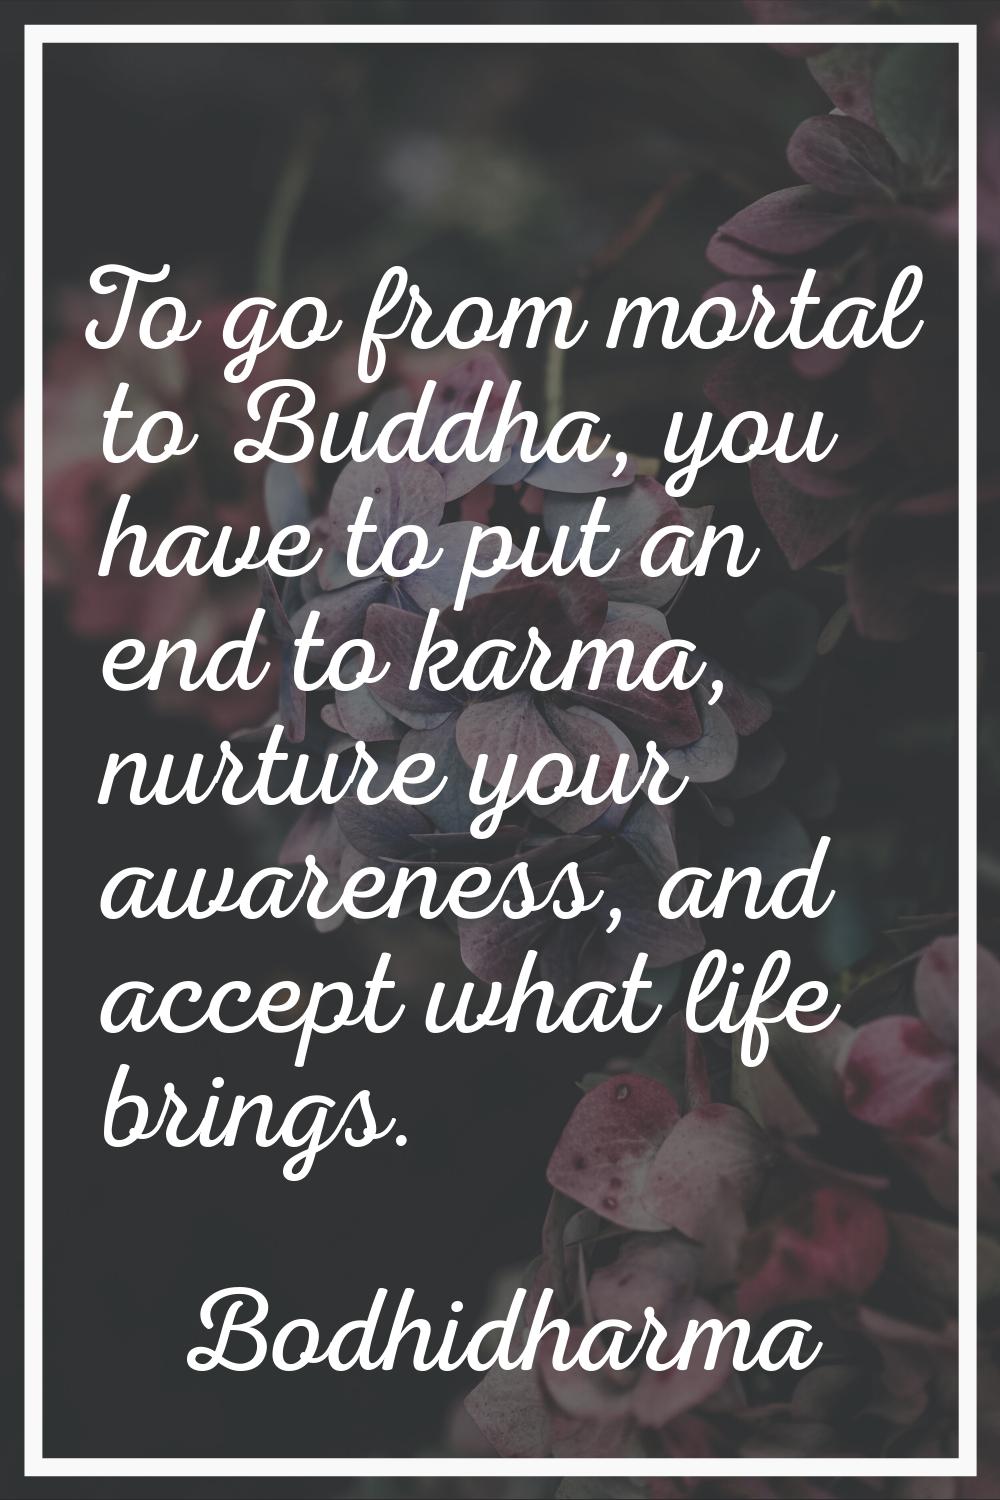 To go from mortal to Buddha, you have to put an end to karma, nurture your awareness, and accept wh